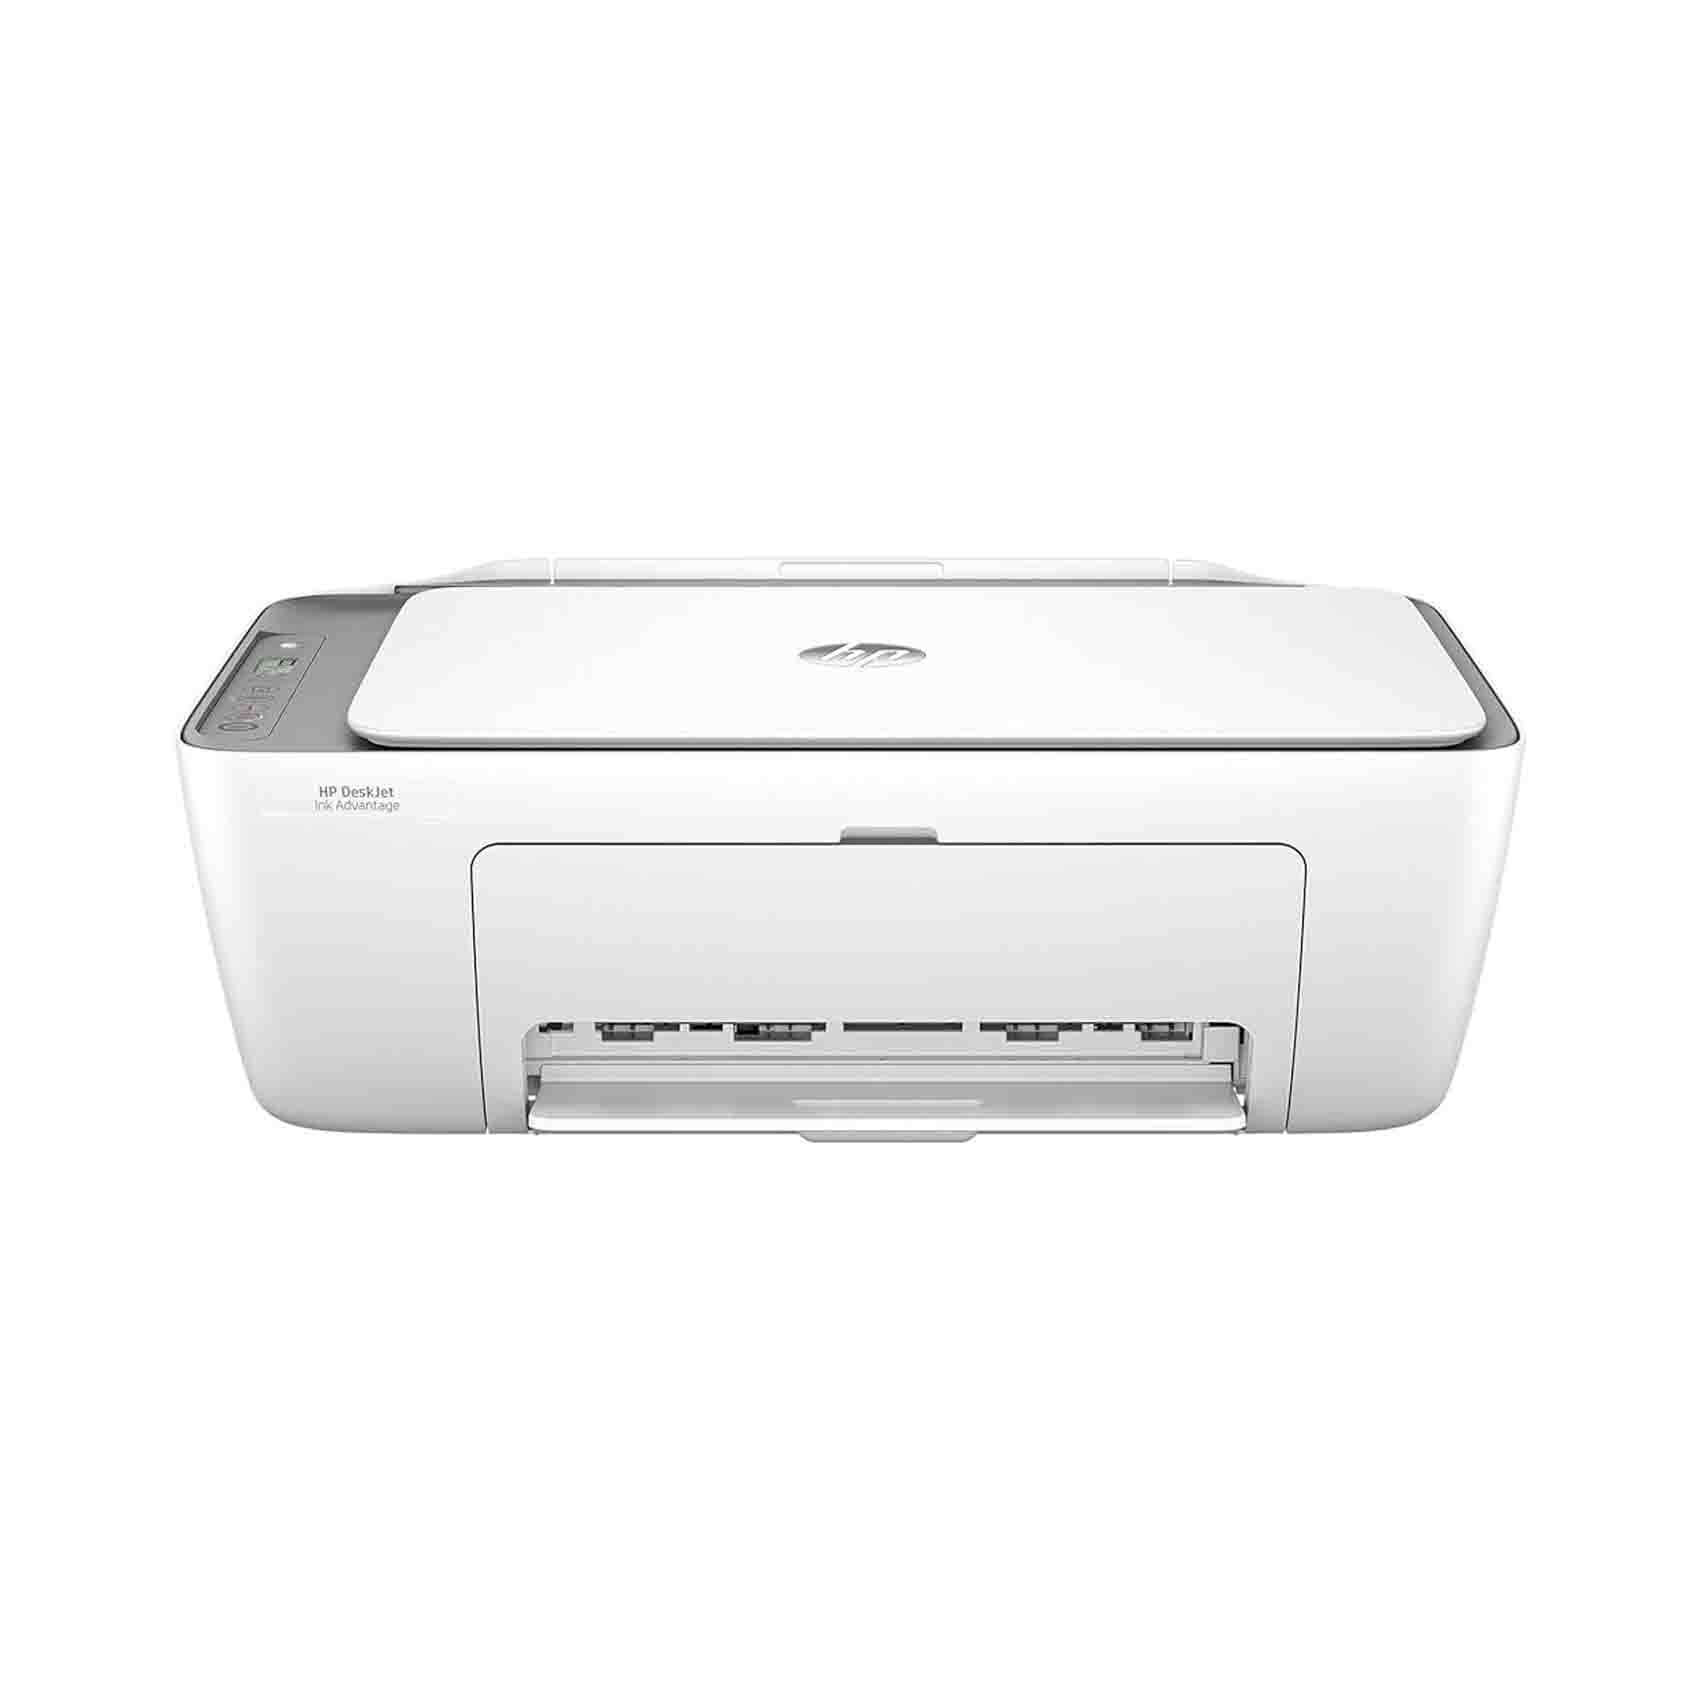 HP DeskJet 2720e Multifunction Printer, 6 Months Free Printing with HP  Instant Ink Included, Printer, Scanner, Copier, WiFi: : Computer &  Accessories